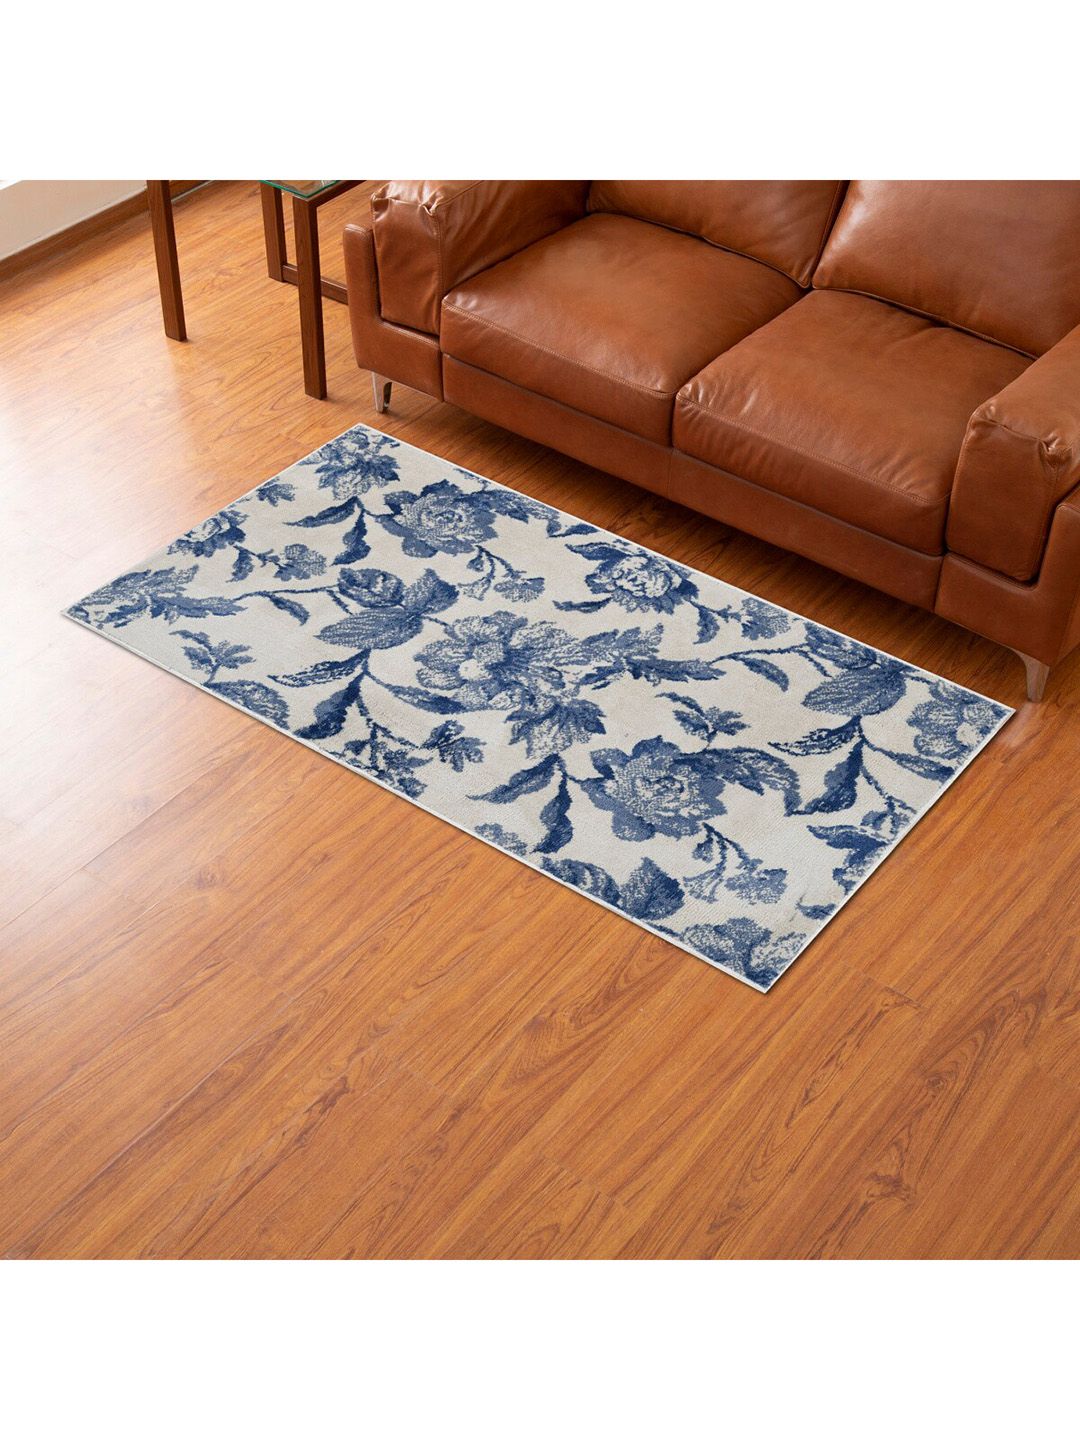 Home Centre Savanna Blue Floral Woven Textured Polyester Carpet - 90x150cm Price in India